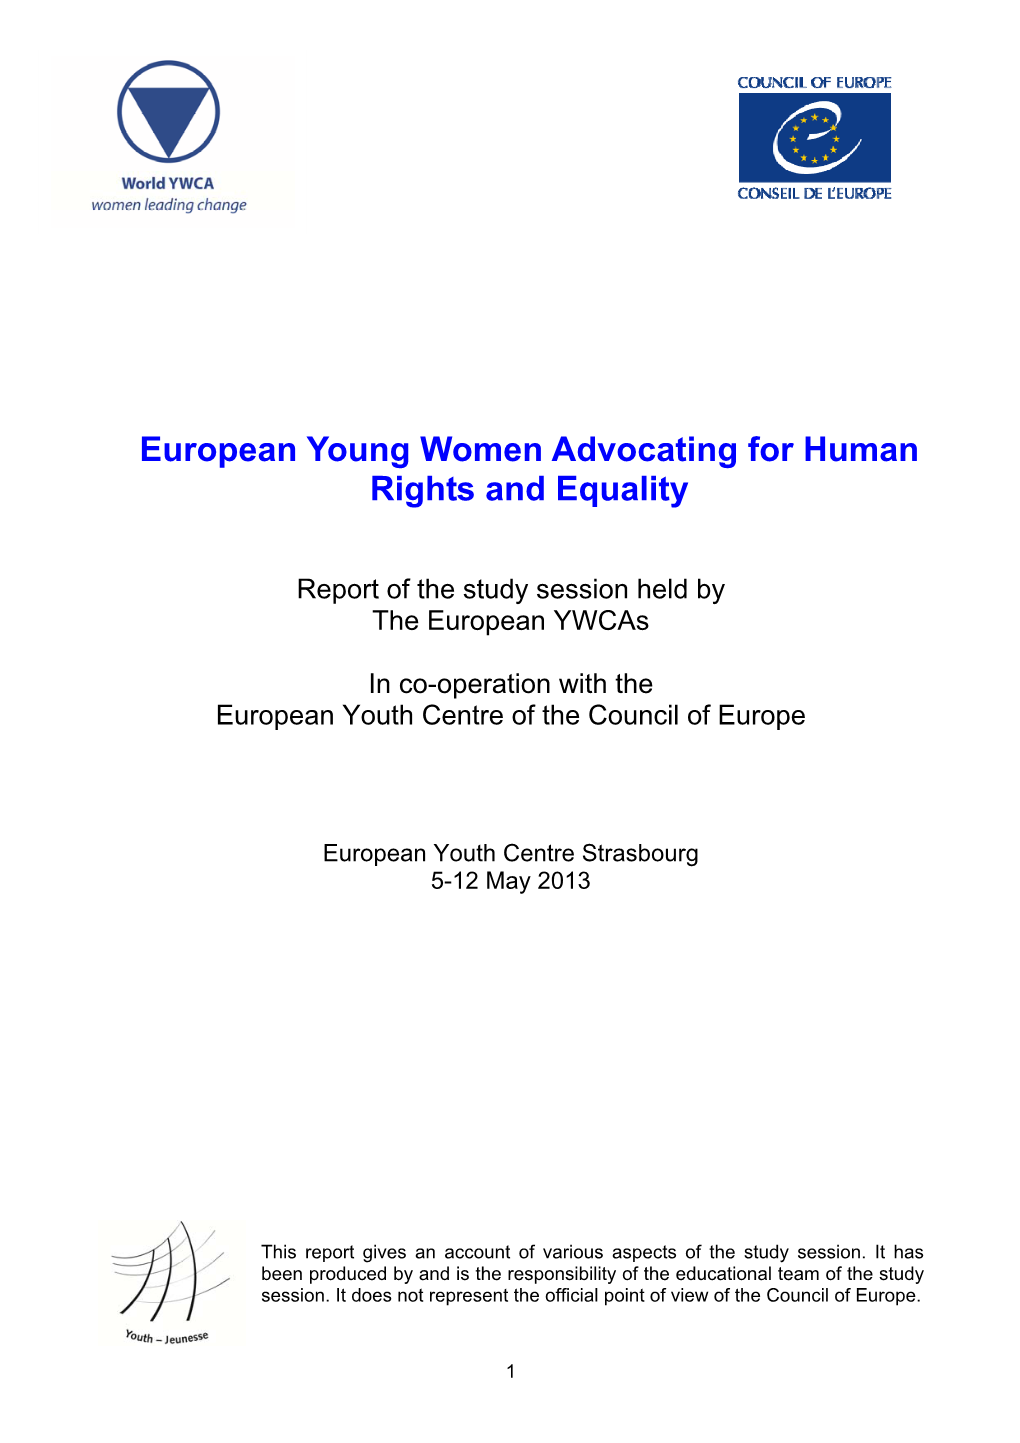 European Young Women Advocating for Human Rights and Equality